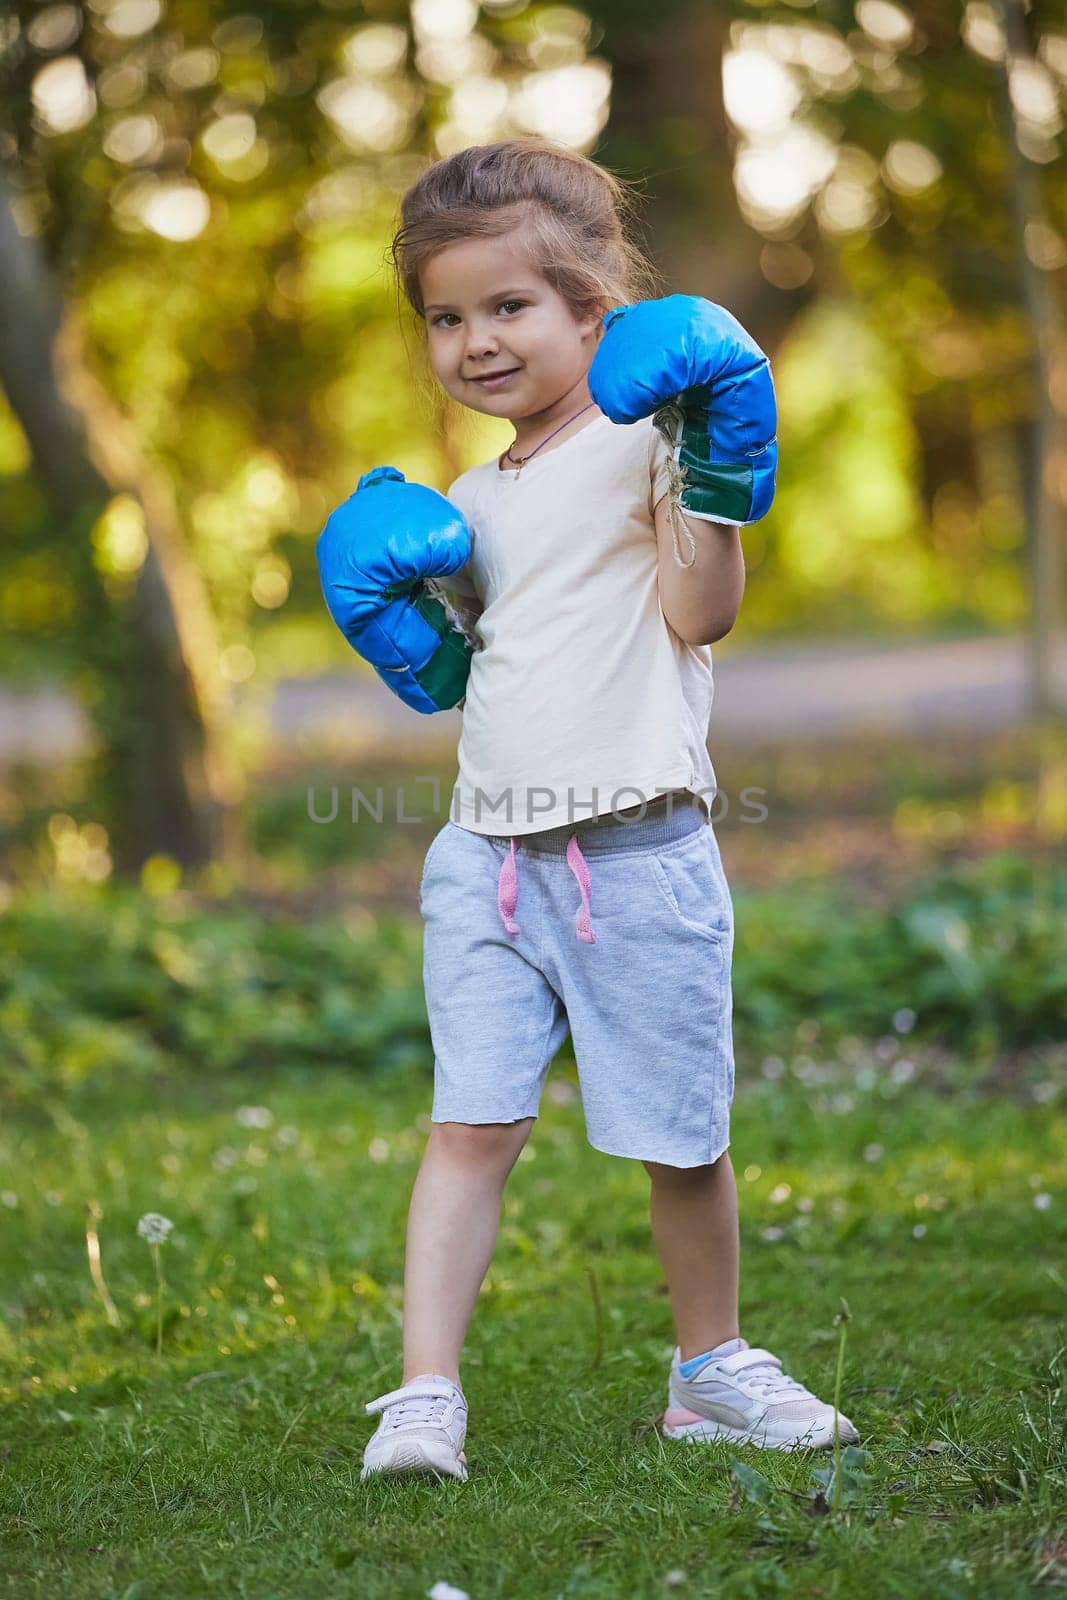 Charming child doing boxing in the backyard on the Sunset by Viktor_Osypenko